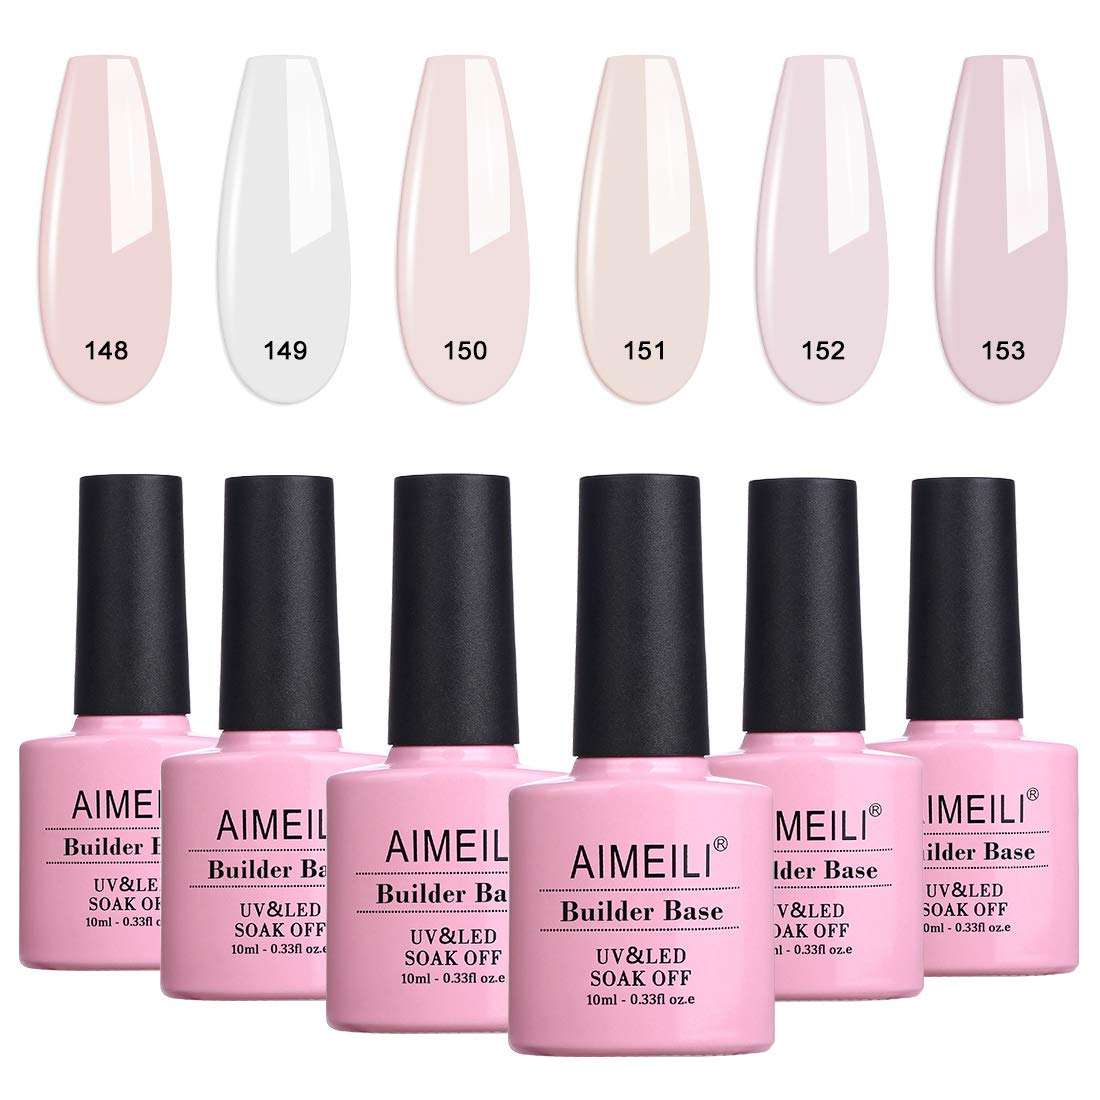 Buy Gellen UV Gel Nail Polish Kit - Popular Nude Colors Series, 6 Colors  8ml Each Nail Gel Manicure Set Online at Low Prices in India - Amazon.in